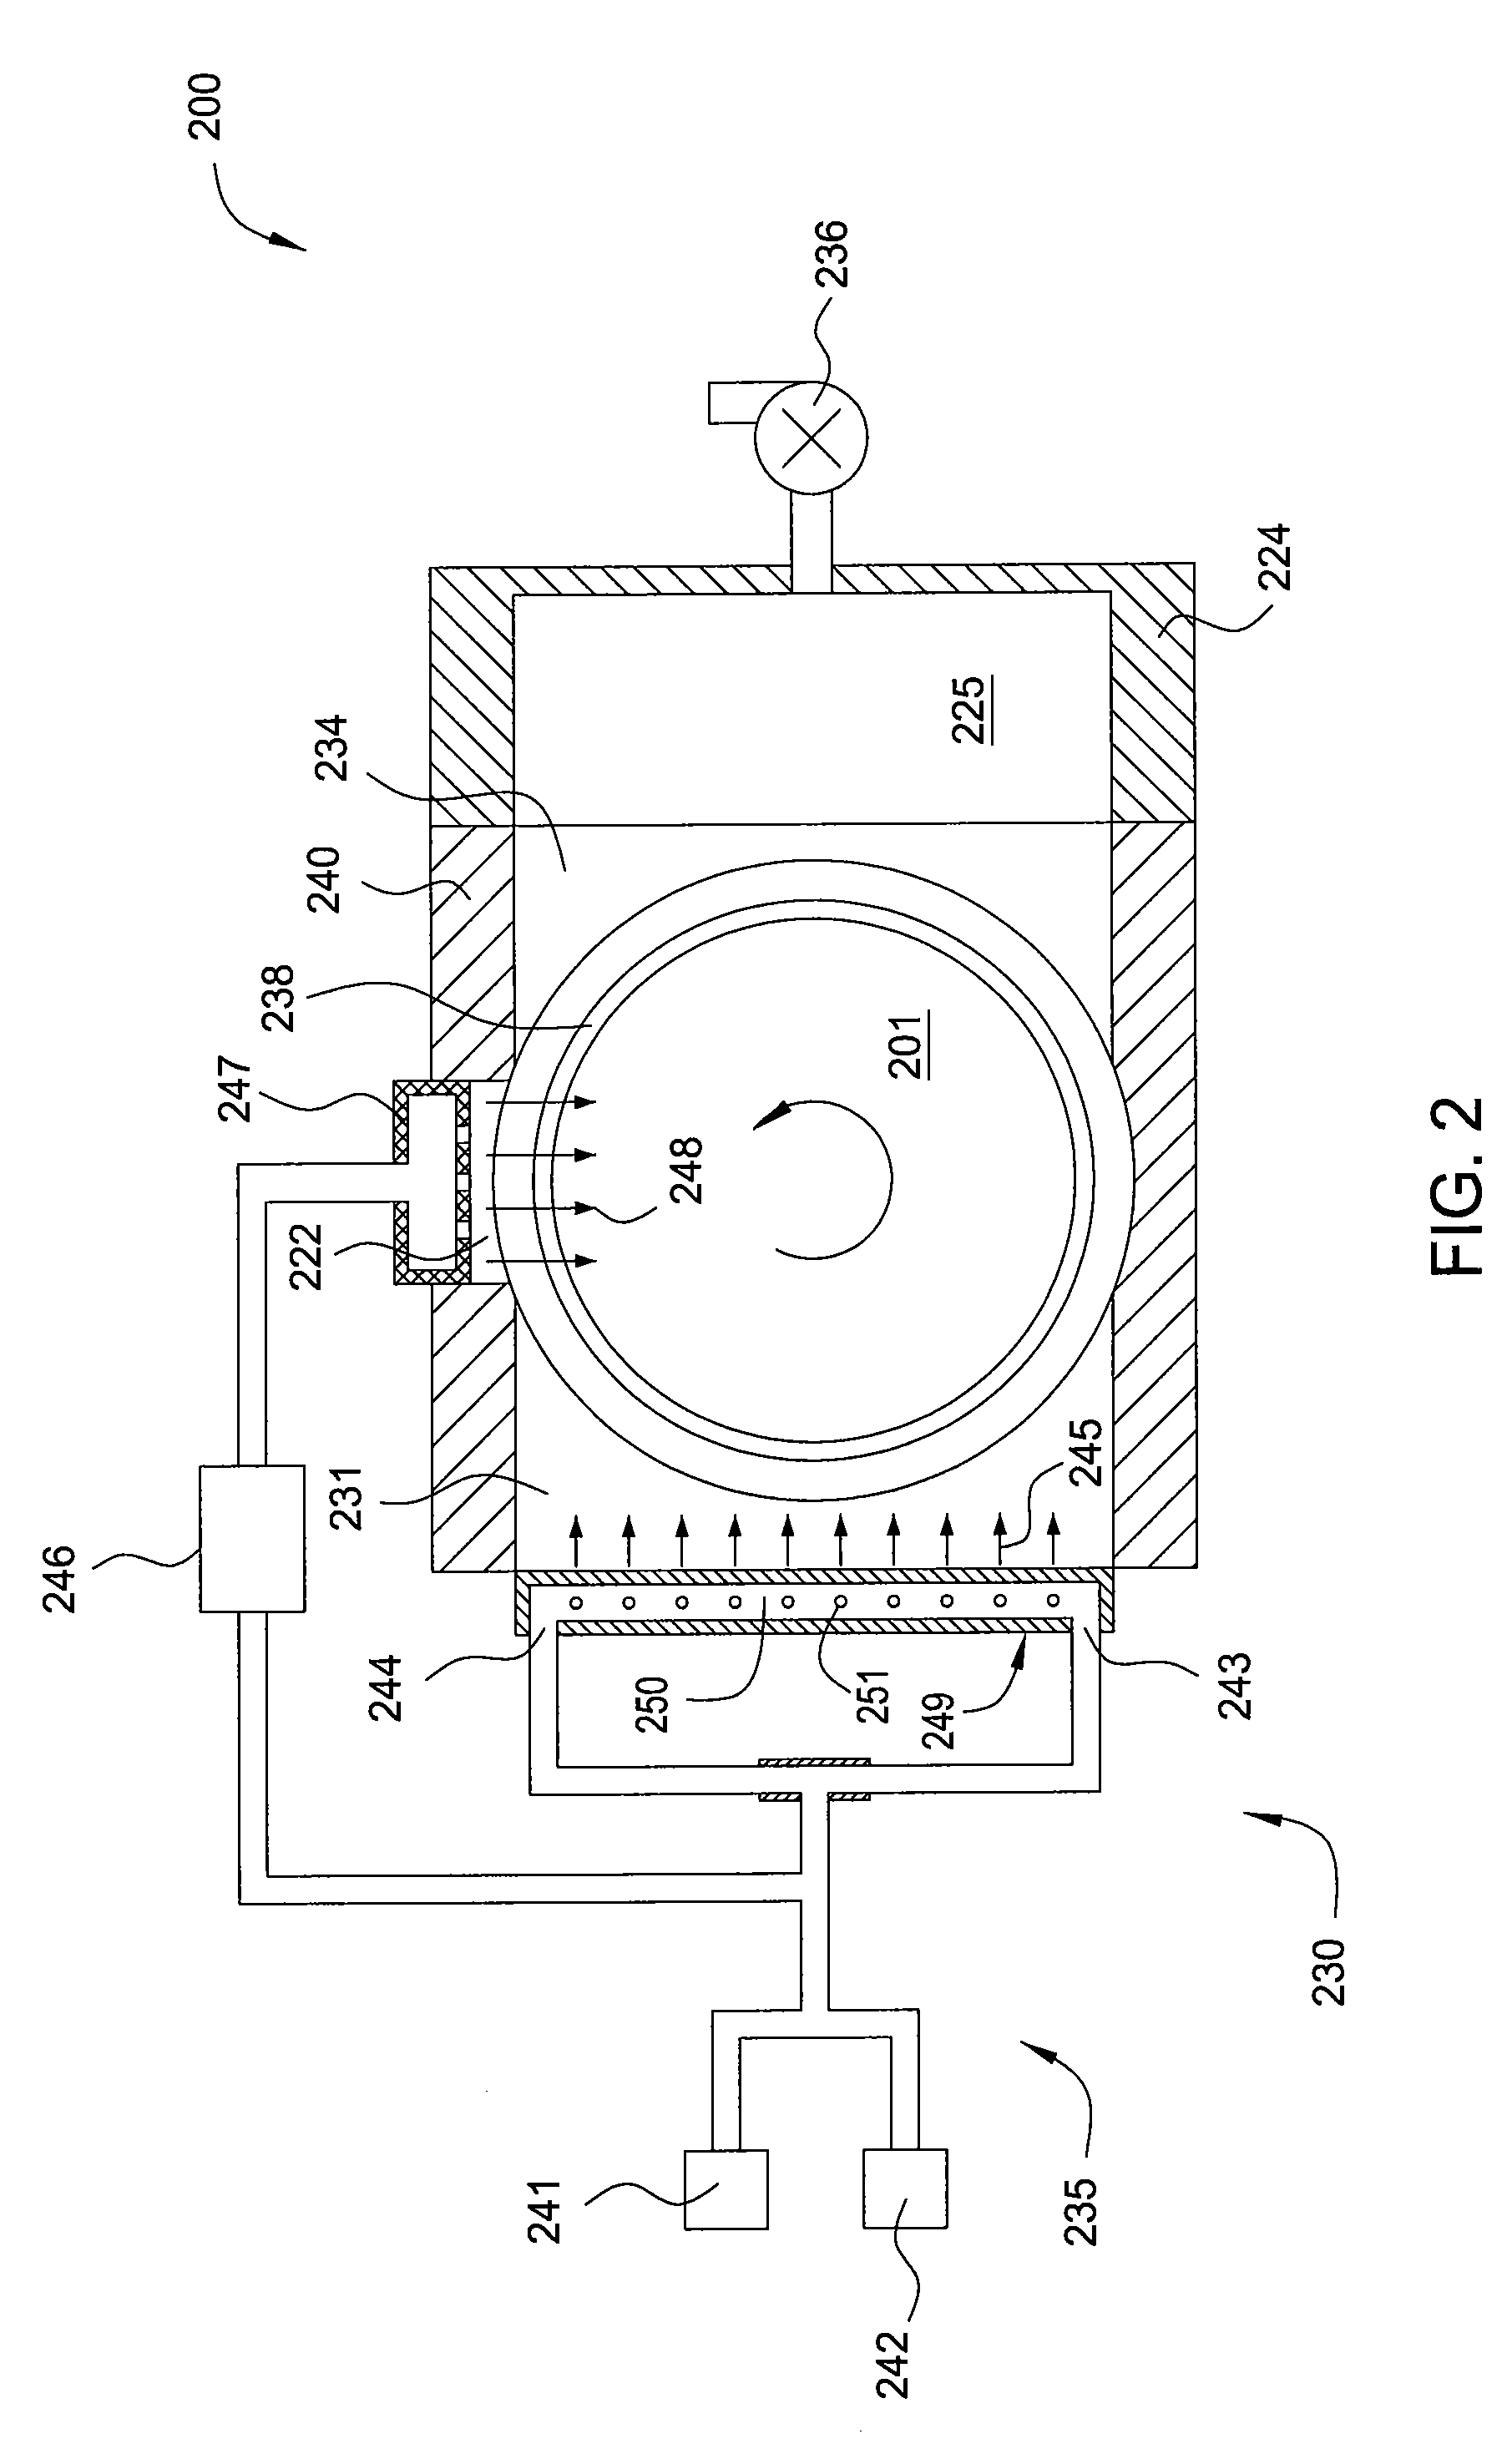 Thermal reactor with improved gas flow distribution